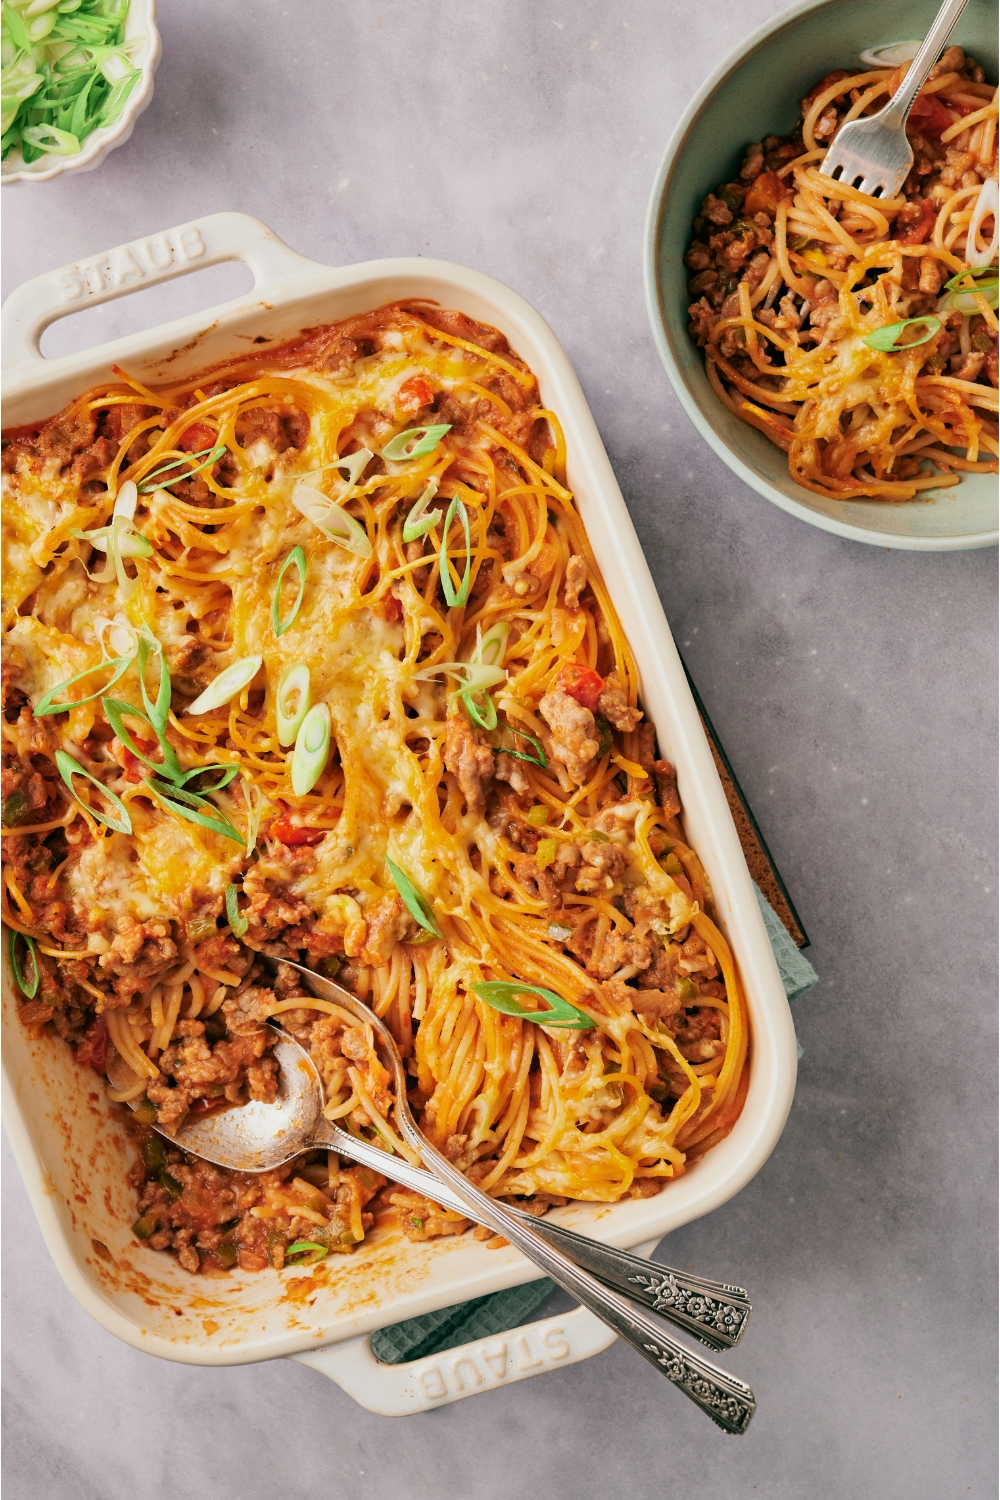 A baking dish filled with cooked Mexican spaghetti. A serving has been scooped out and added to a bowl next to the baking dish.